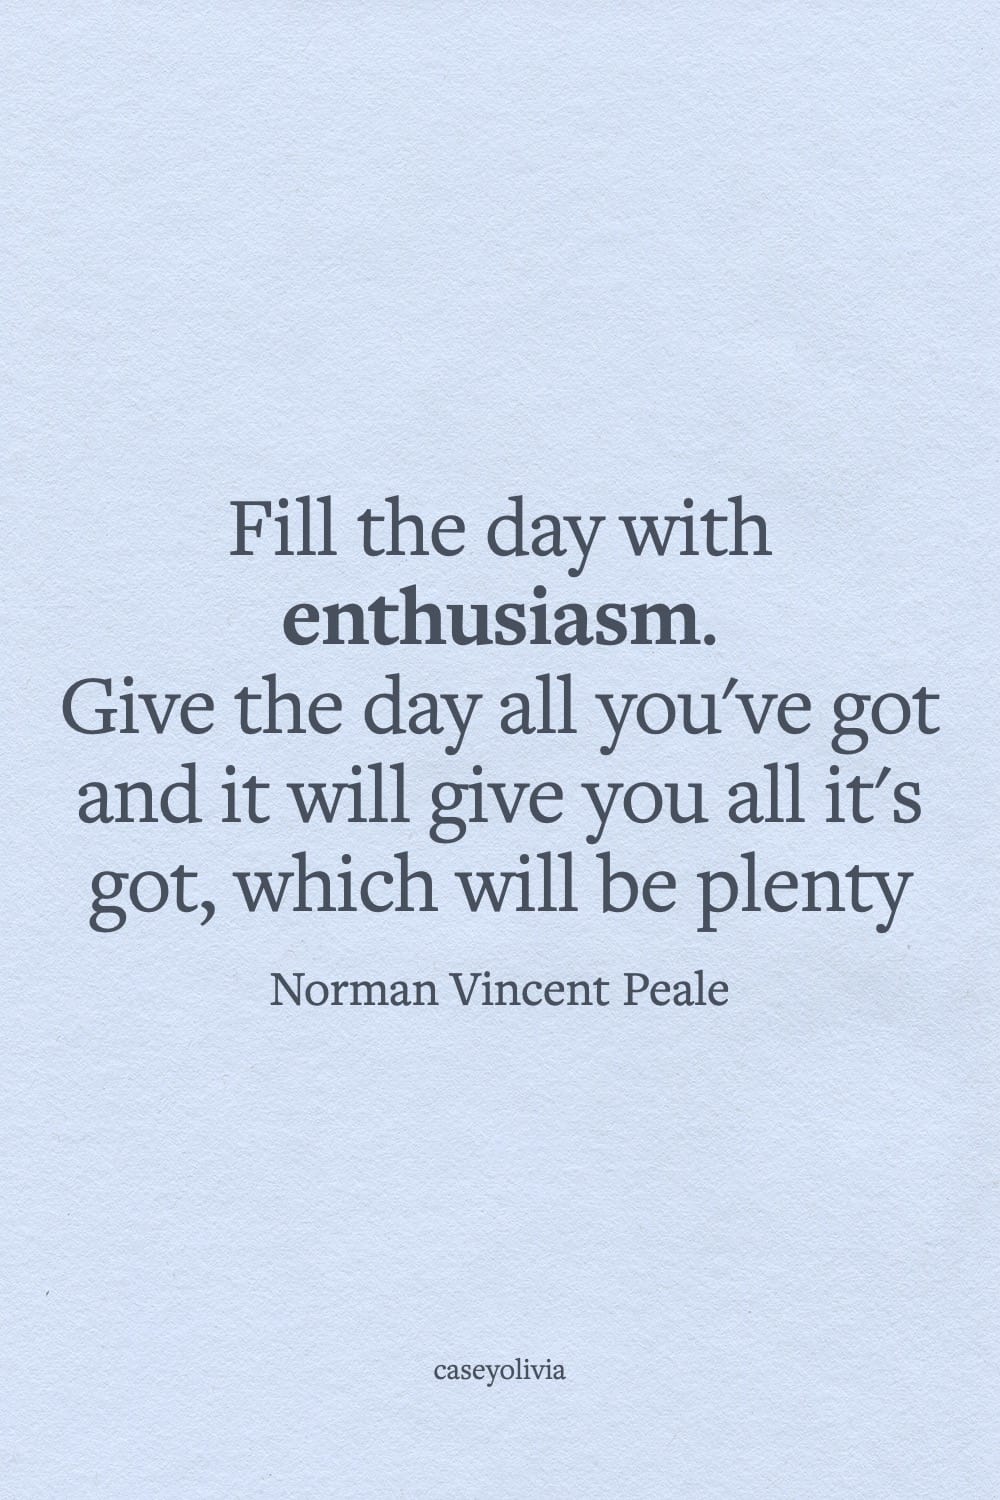 fill the day with enthusiasm quote image for inspo